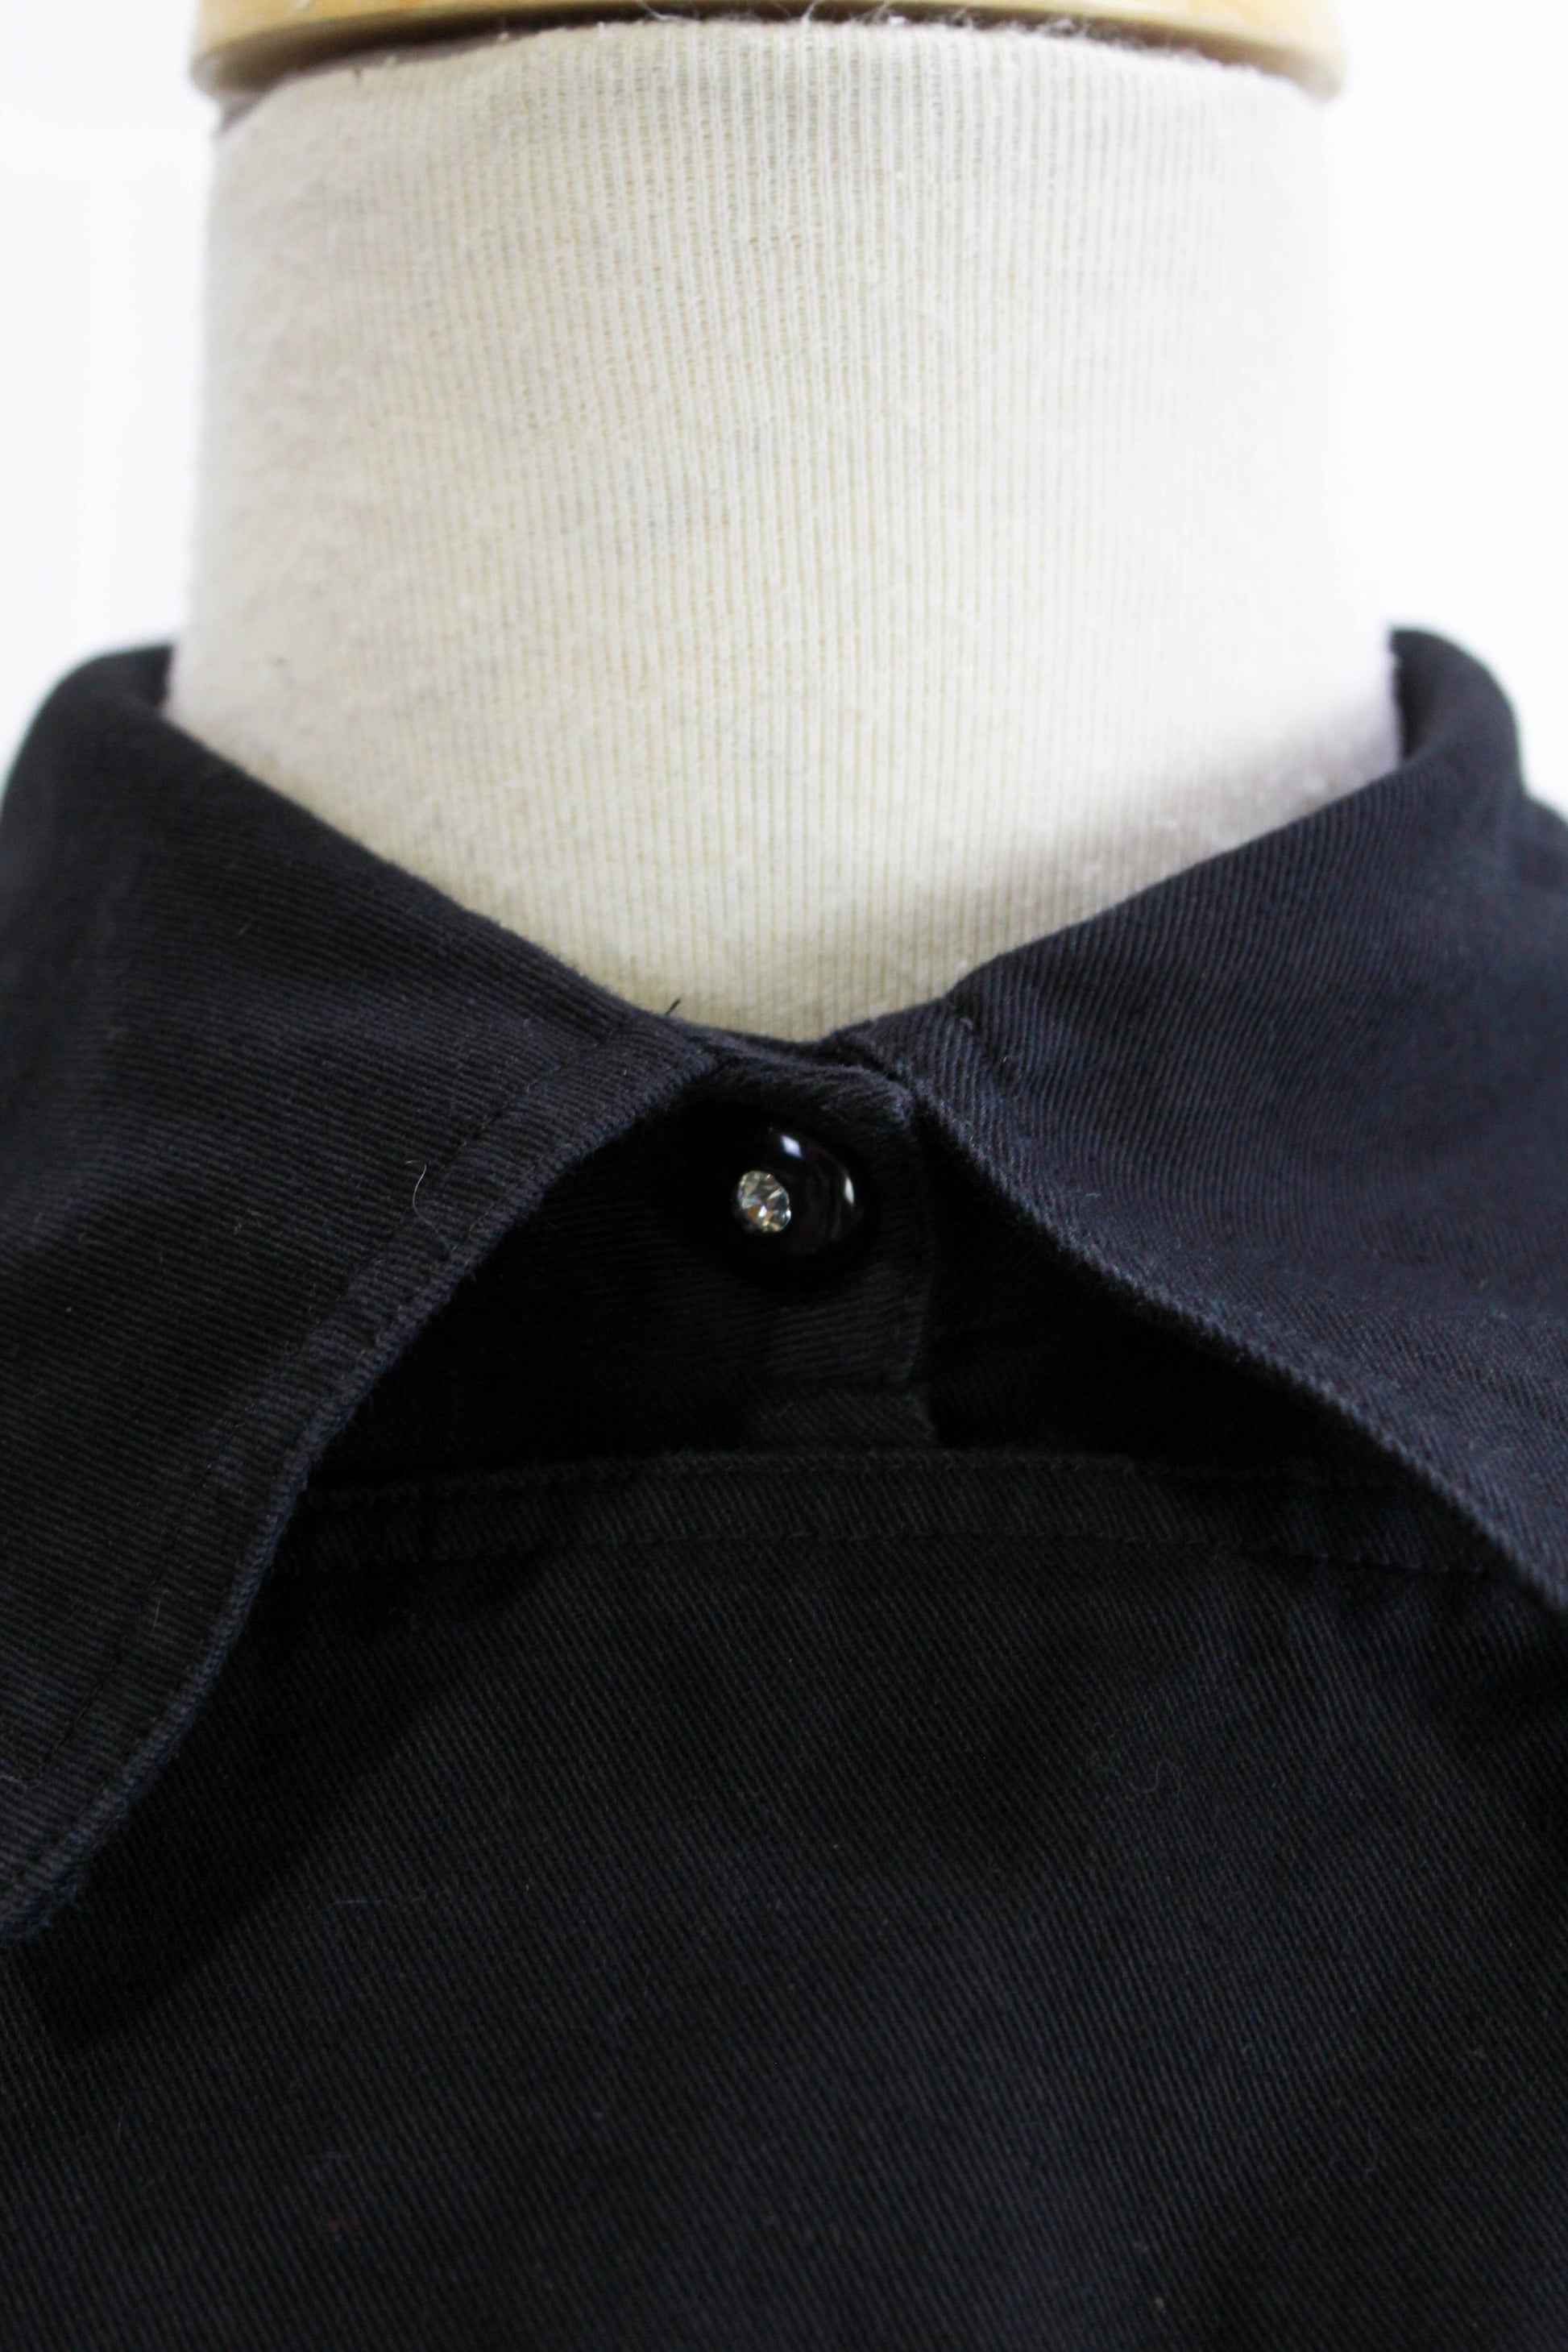 1980s womens jumpsuit black cotton with bib front, collar button up collar closeup